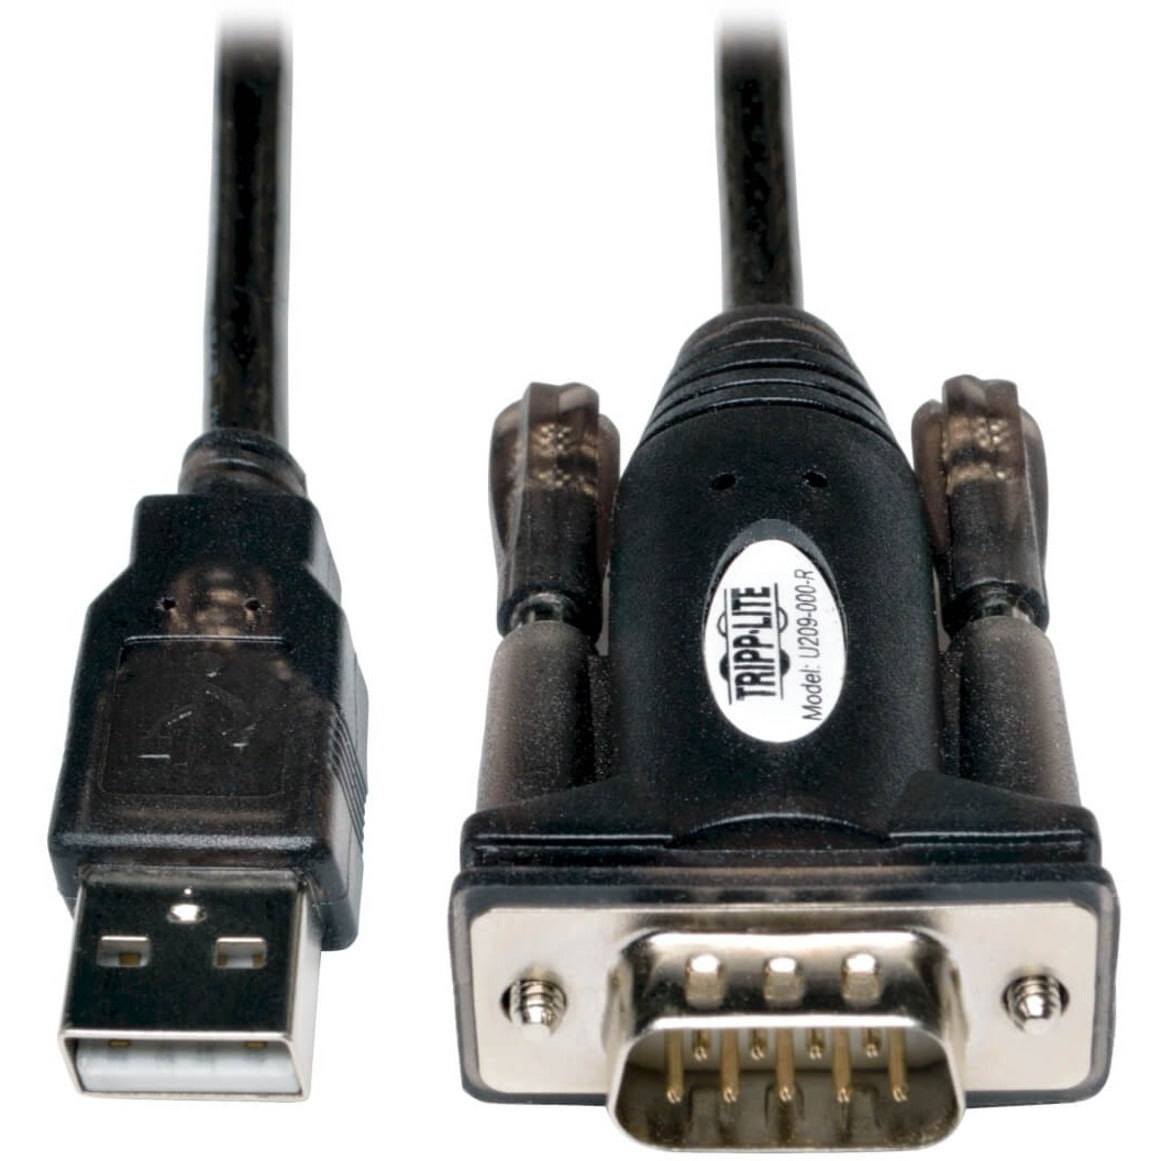 Tripp Lite U209-000-R USB to Serial Adapter, Connect Cameras, Computers, and Modems with Ease